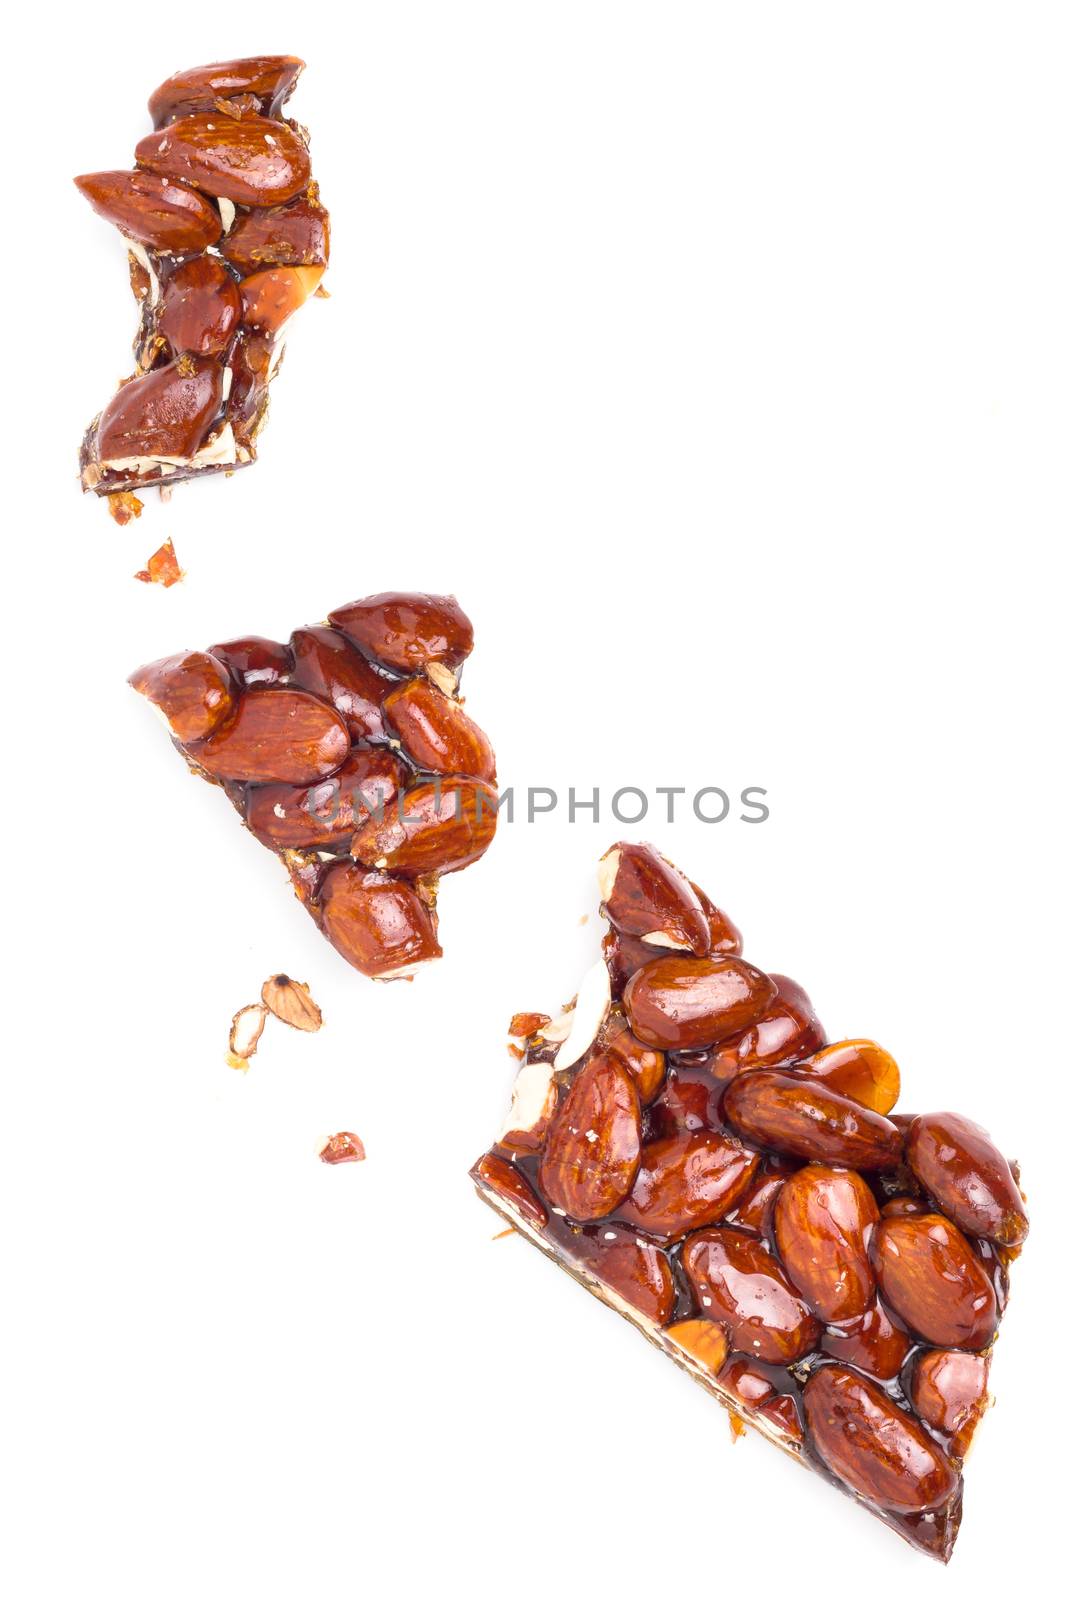 Nougat with almonds. Typical Sicilian dessert. Isolated on white background.